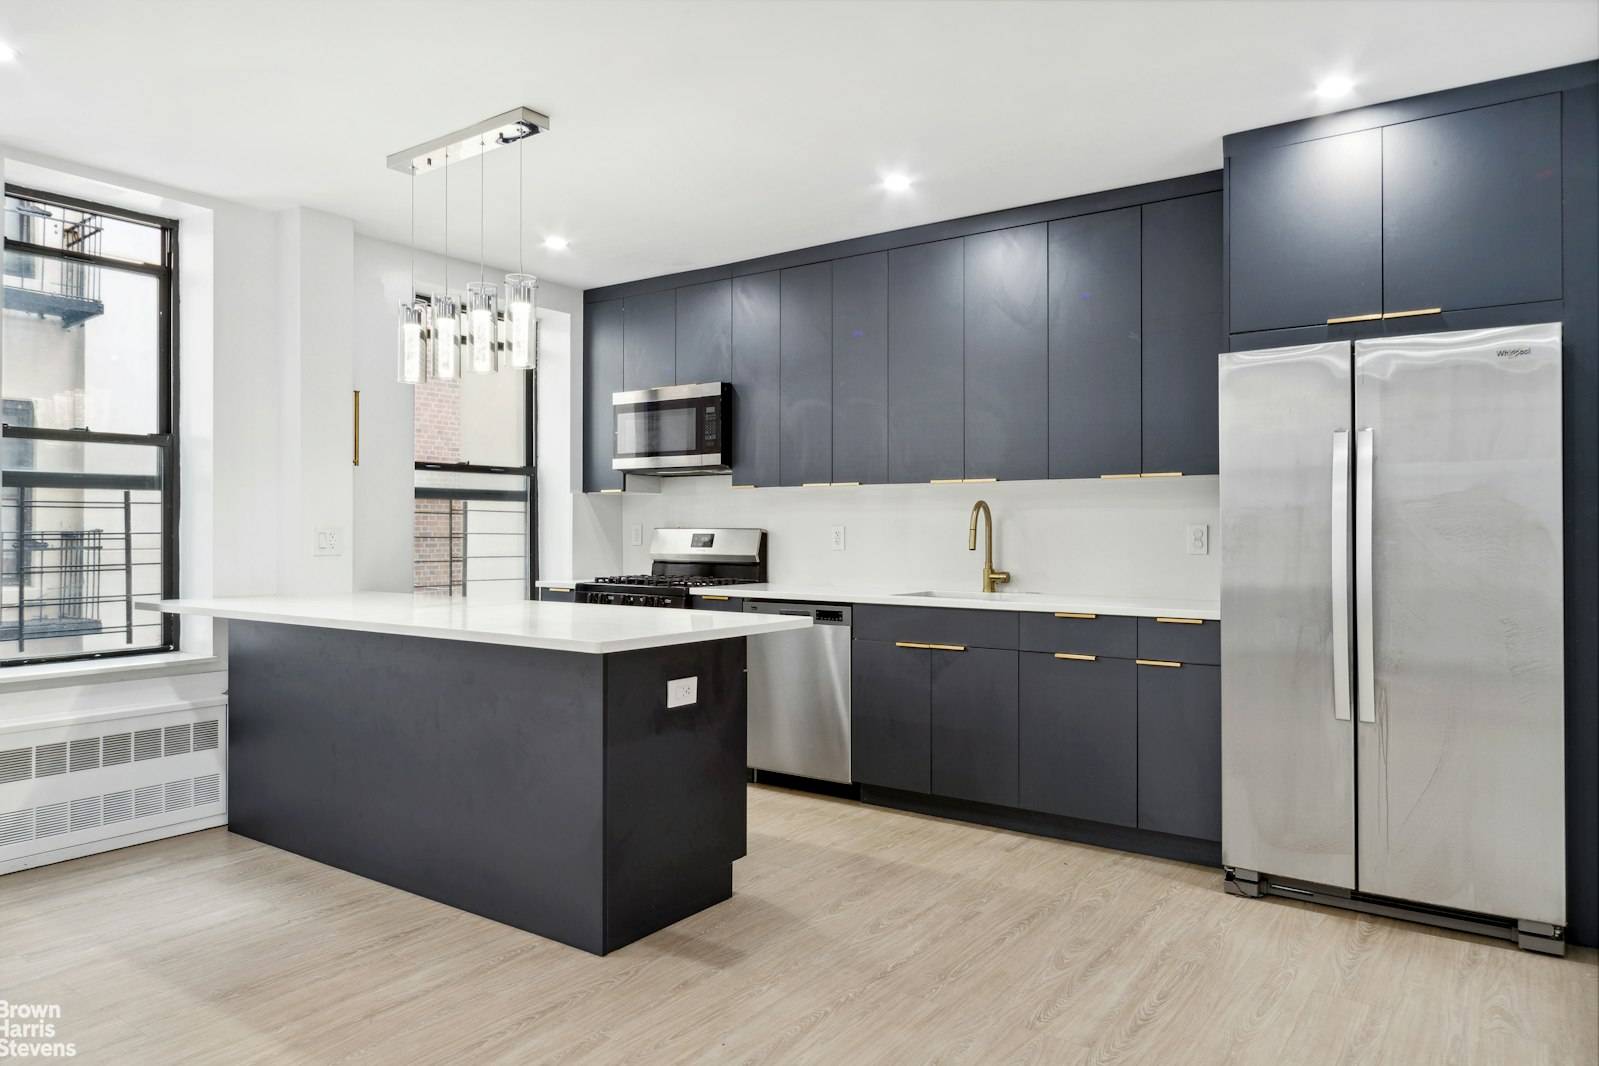 Welcome to Apartment D23 at 150 Crown Street, ideally situated just blocks away from the Brooklyn Botanic Garden, amp ; Prospect Park.